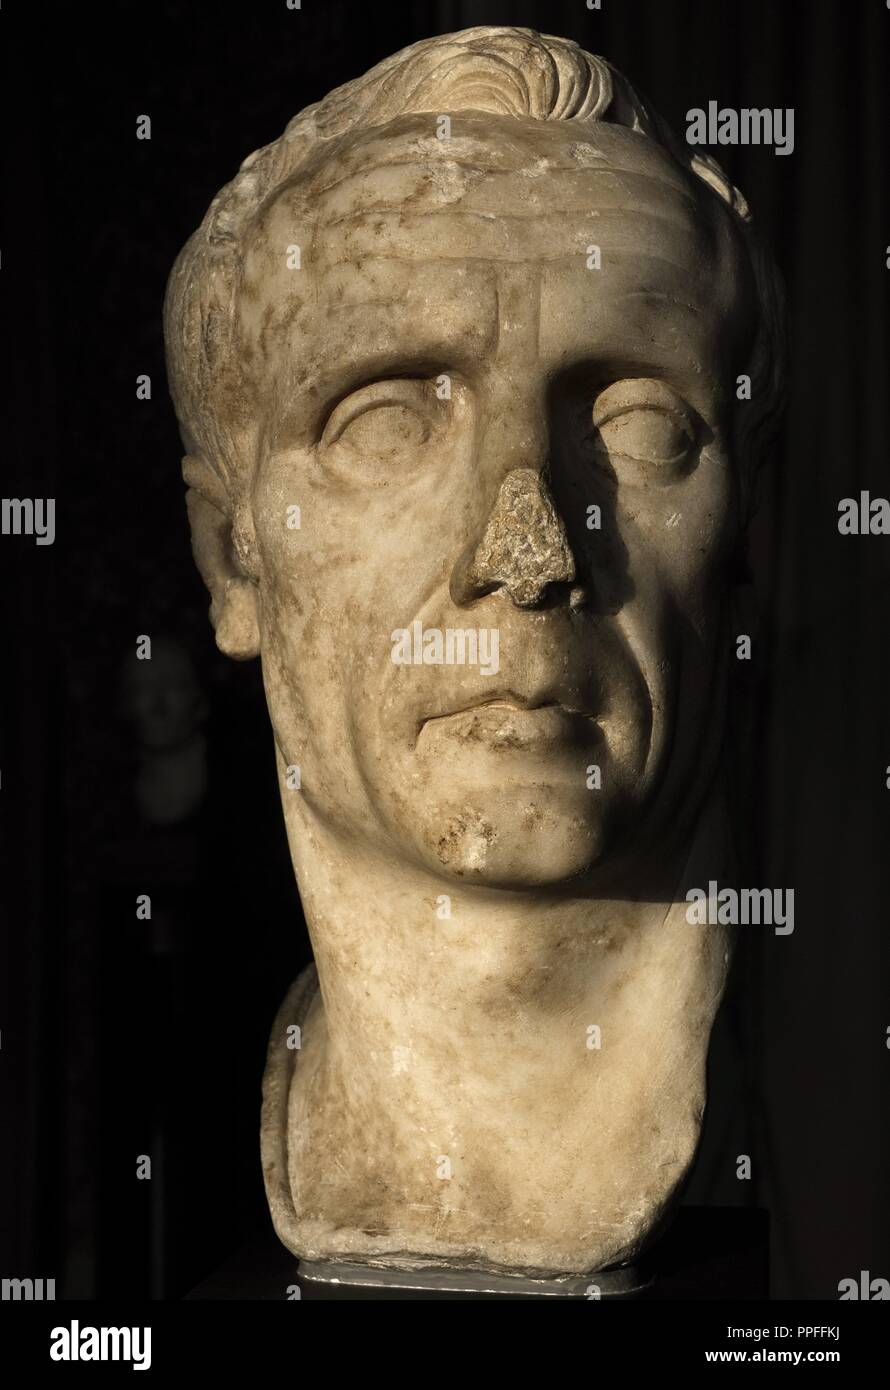 Bust identified by some as Julius Caesar (102-100-44 BC), others as dictator Sulla (138-78 BC). Perhaps an unknown Roman Republican era. S. 1st century AD. Marble. Carlsberg Glyptotek Museum. Copenhagen. Denmark. Stock Photo